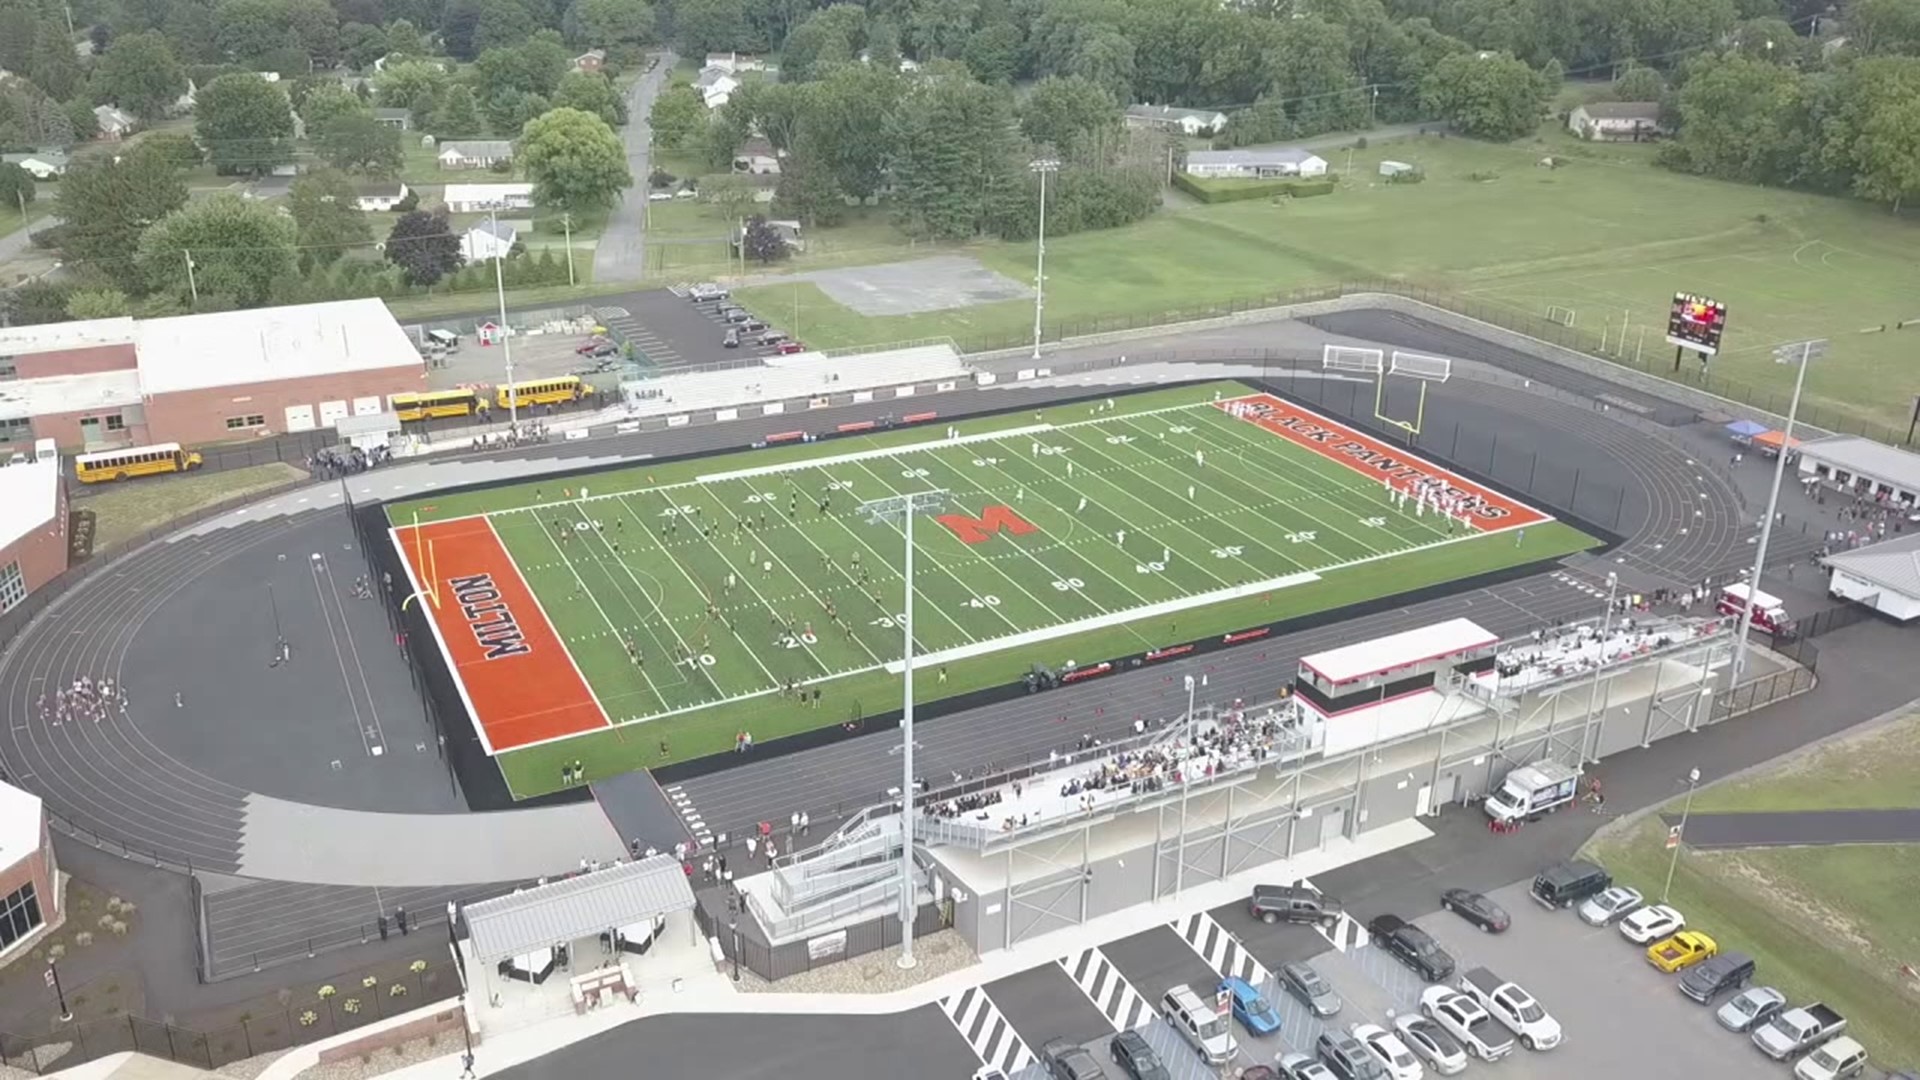 High school football is back and a school district in Northumberland County unveiled a new sports complex Friday night.